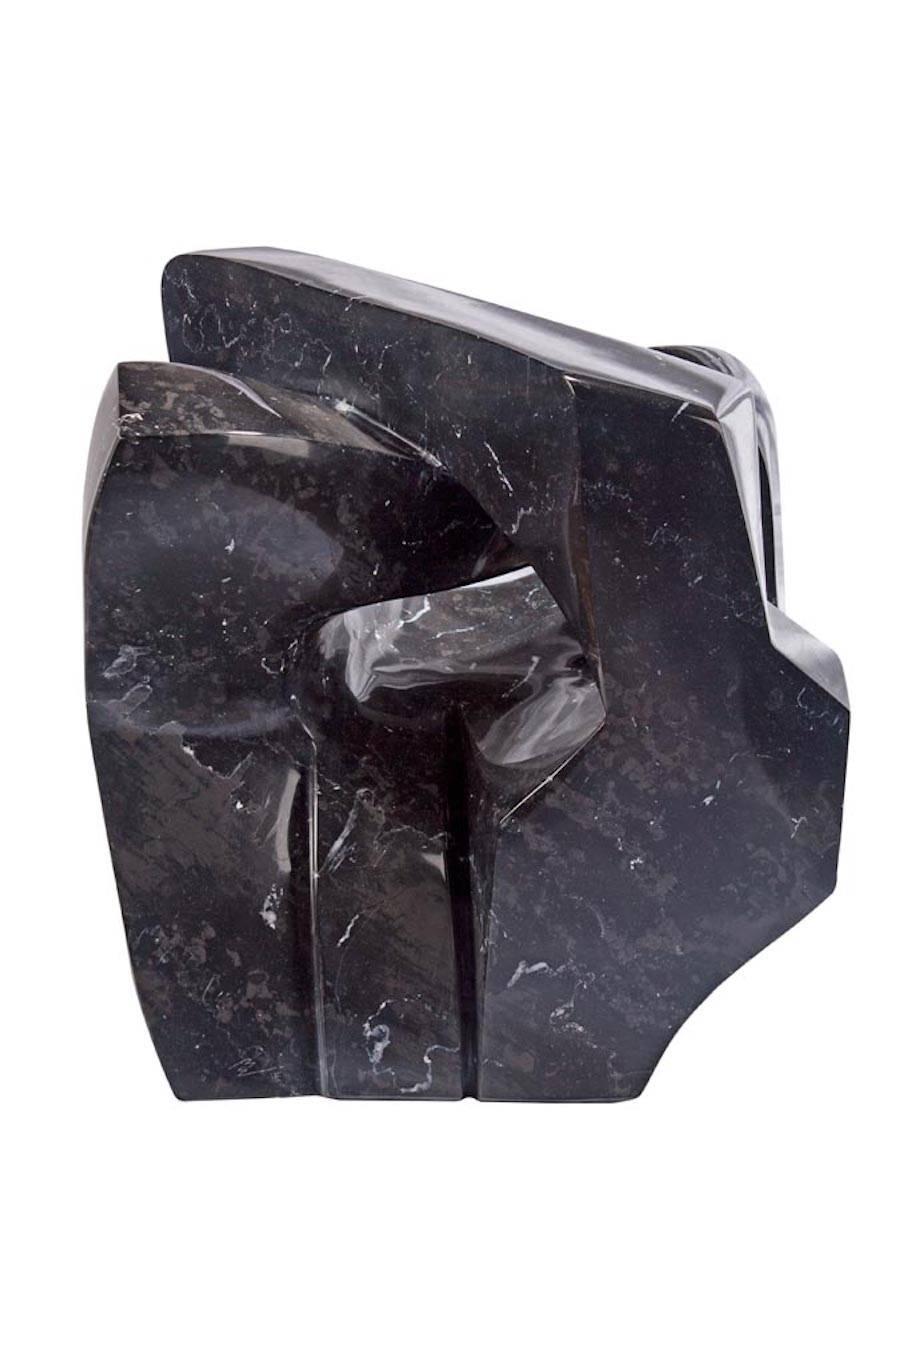 Contemporary Knott, Fantastic Black Marble Sculpture by Eugenia Belden For Sale